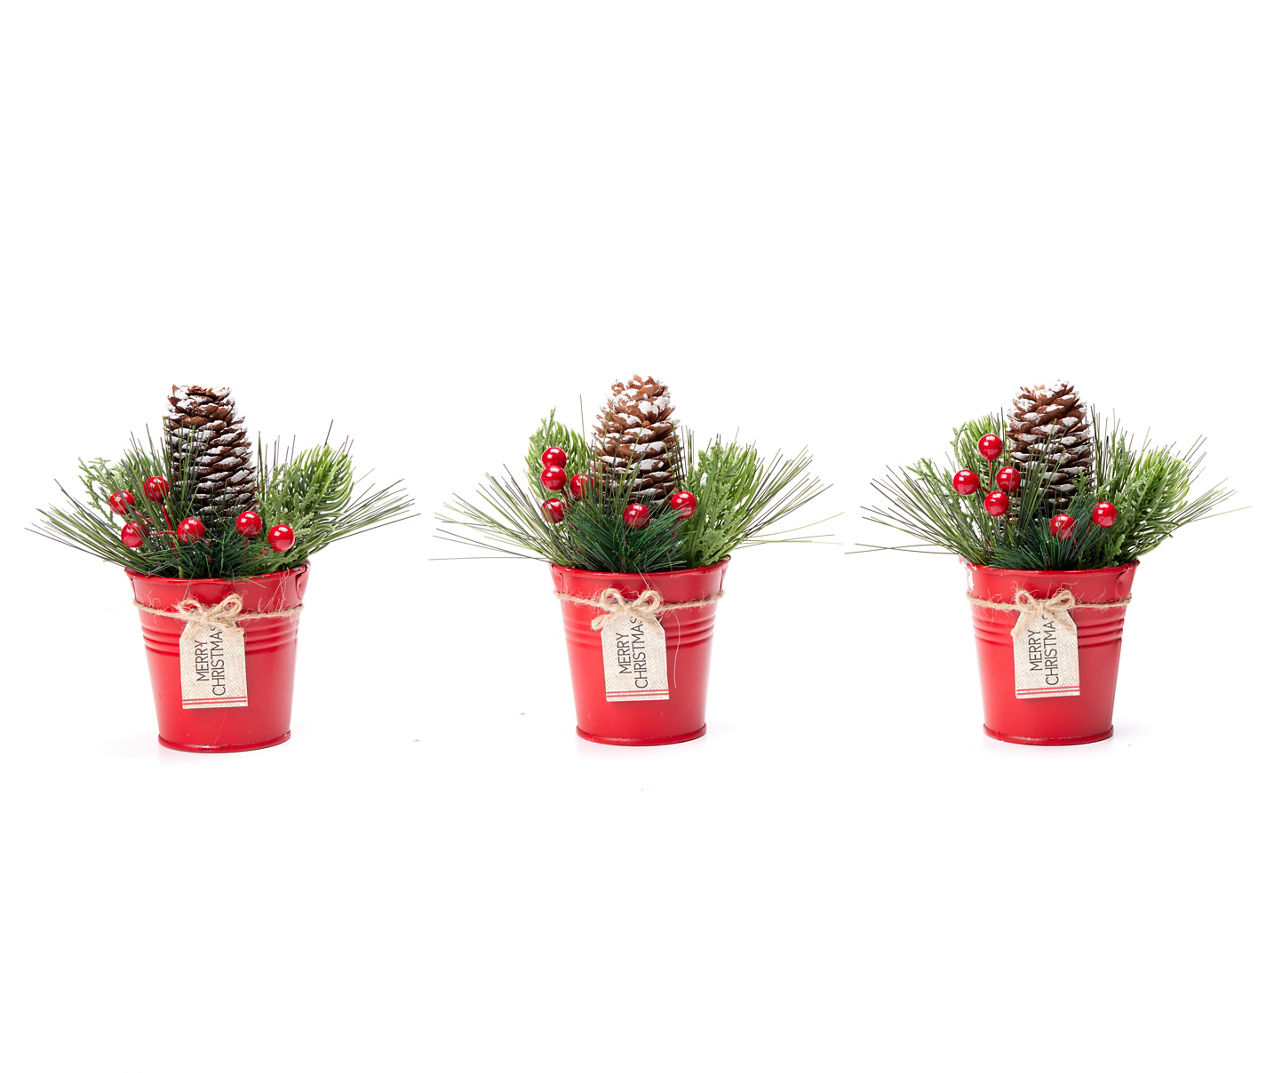 "Merry Christmas" Red Metal Bucket Ornaments, 3-Pack